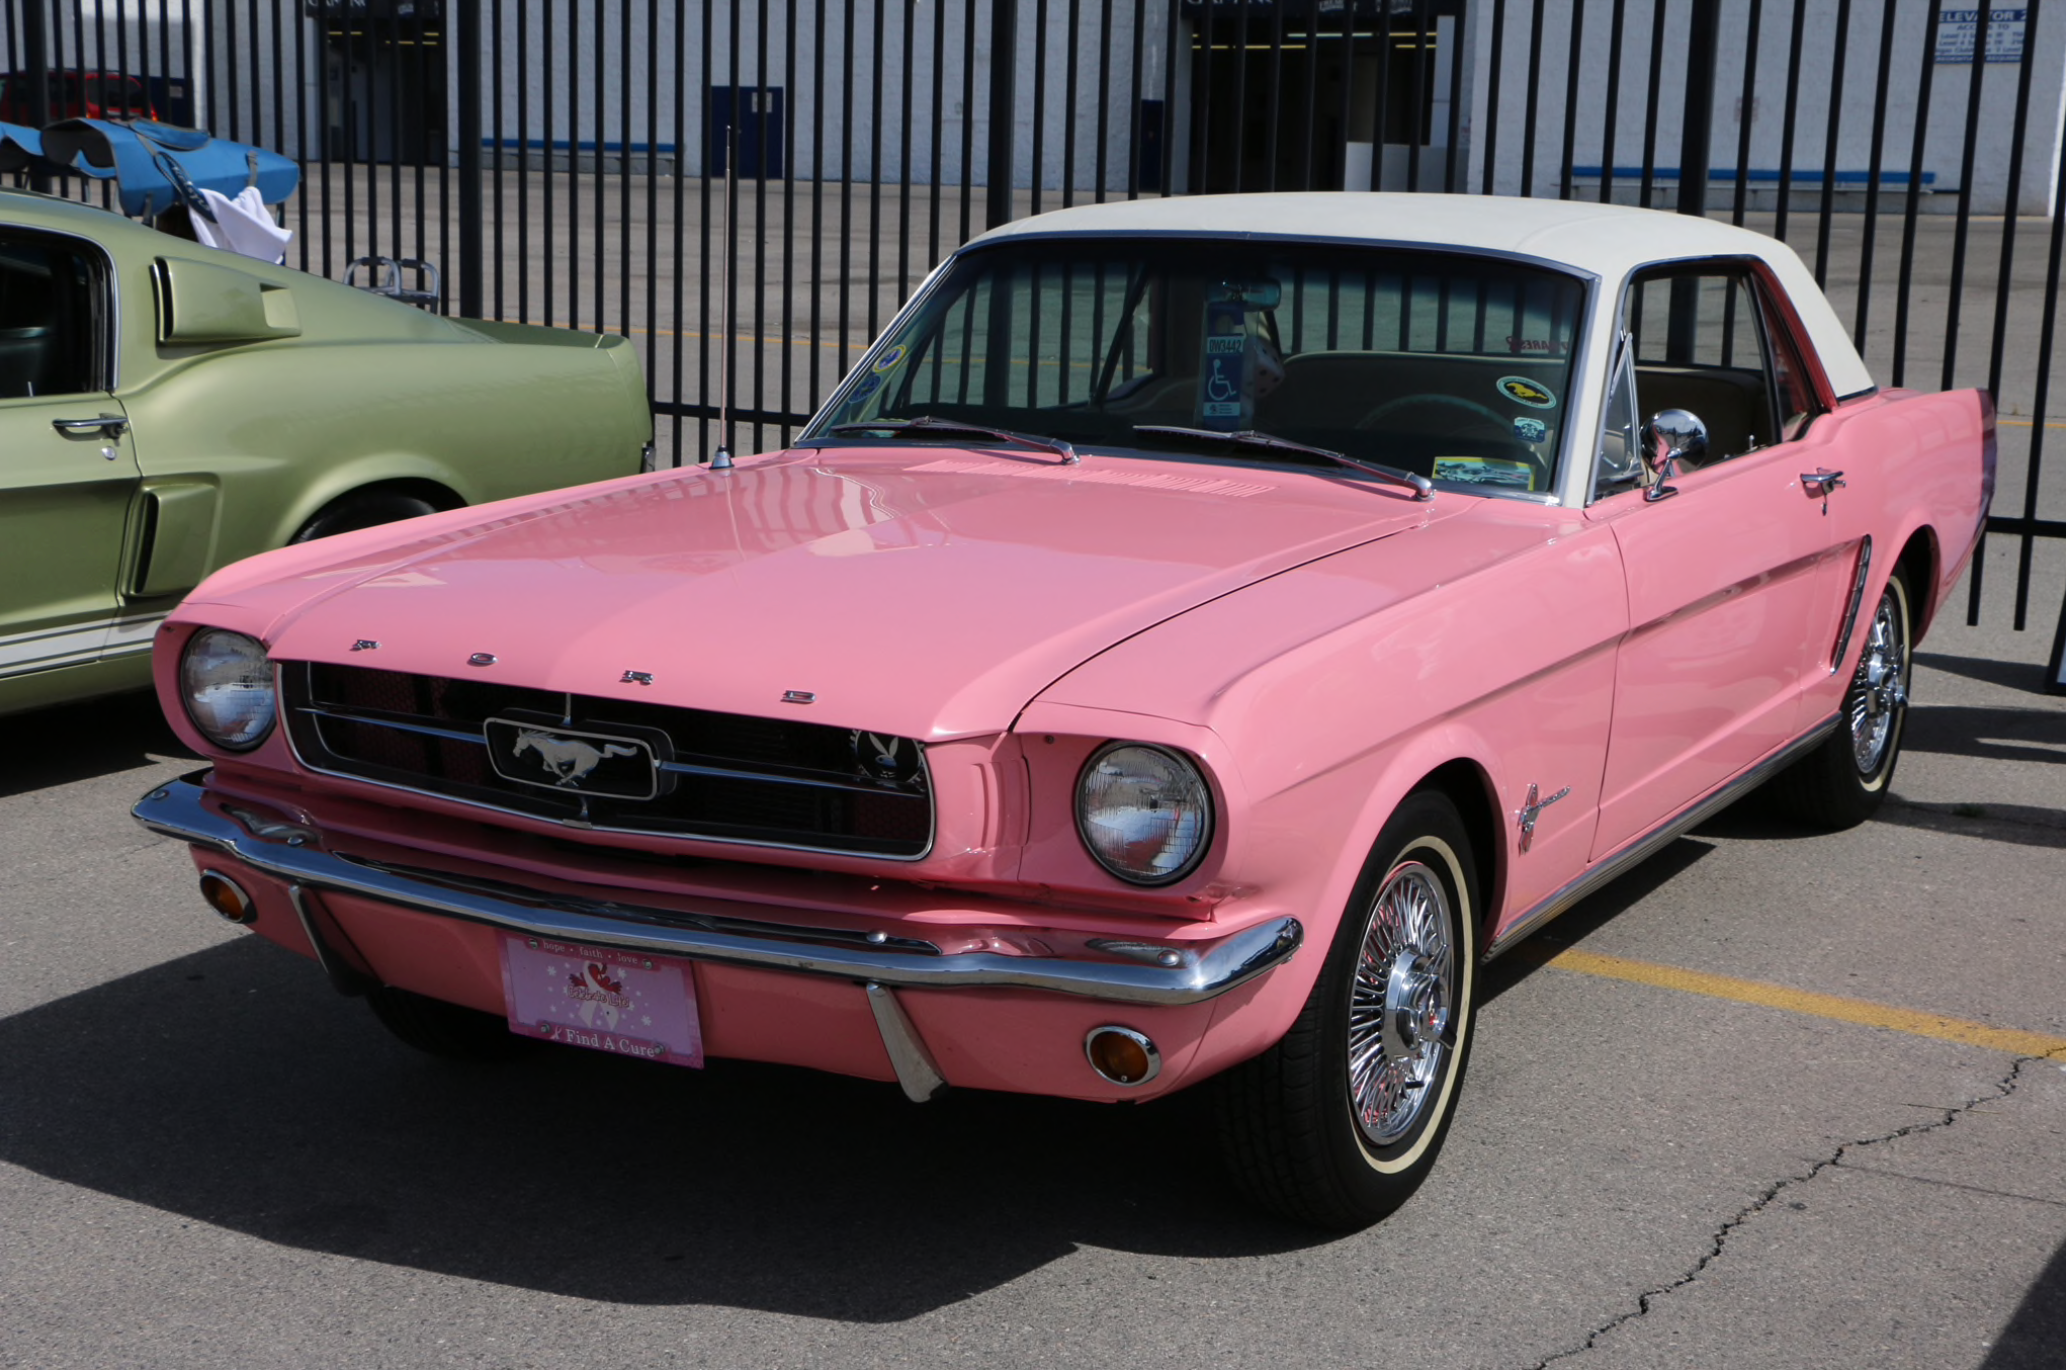 pink 1964 1/2 mustang, front view